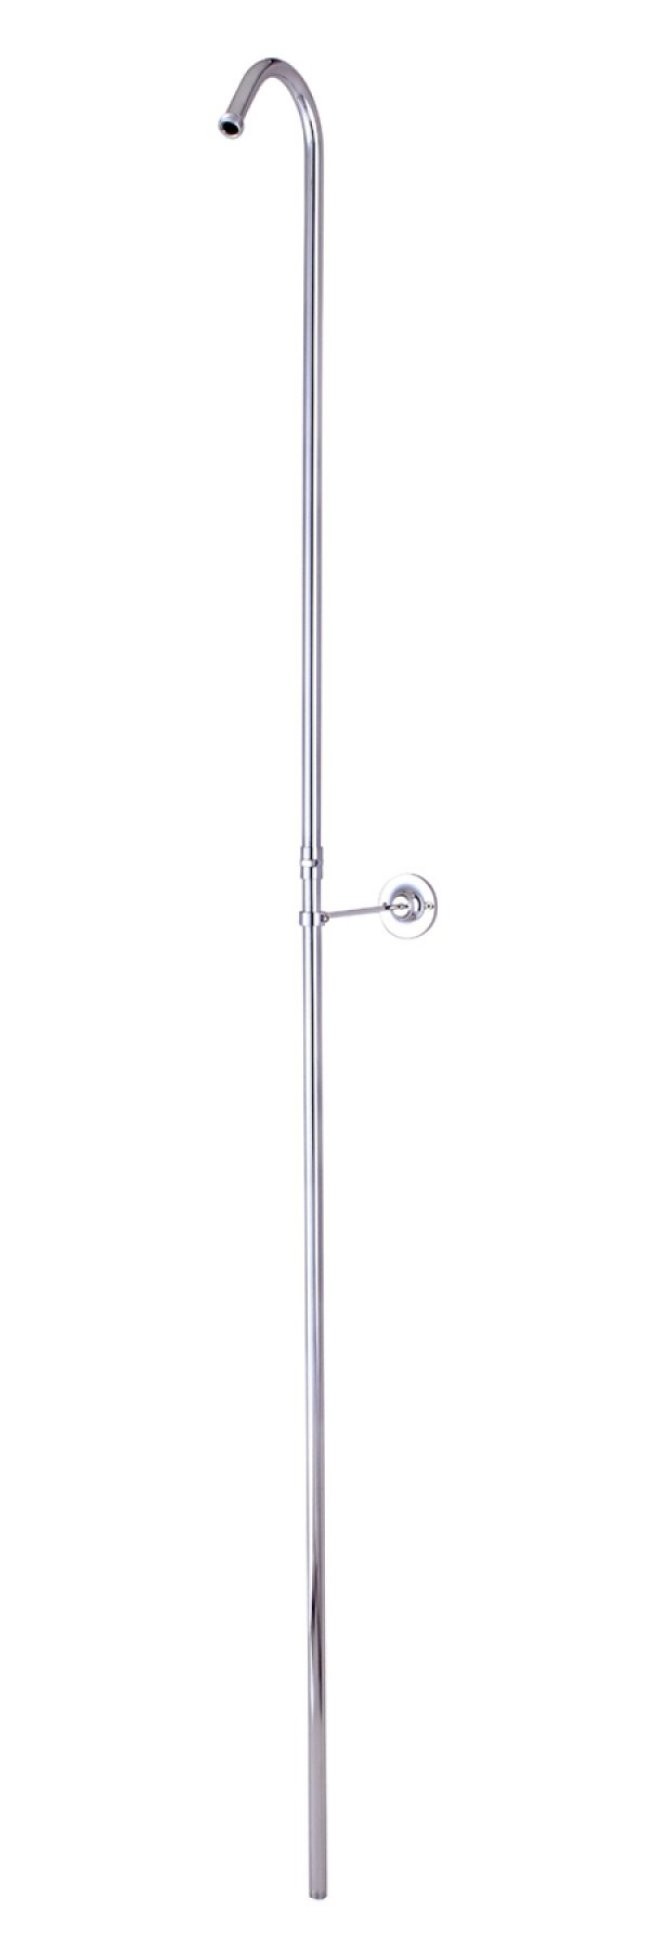 KINGSTON BRASS CC3162 VINTAGE CONVERT-A-SHOWER WITHOUT SPOUT AND  SHOWERHEAD, POLISHED BRASS